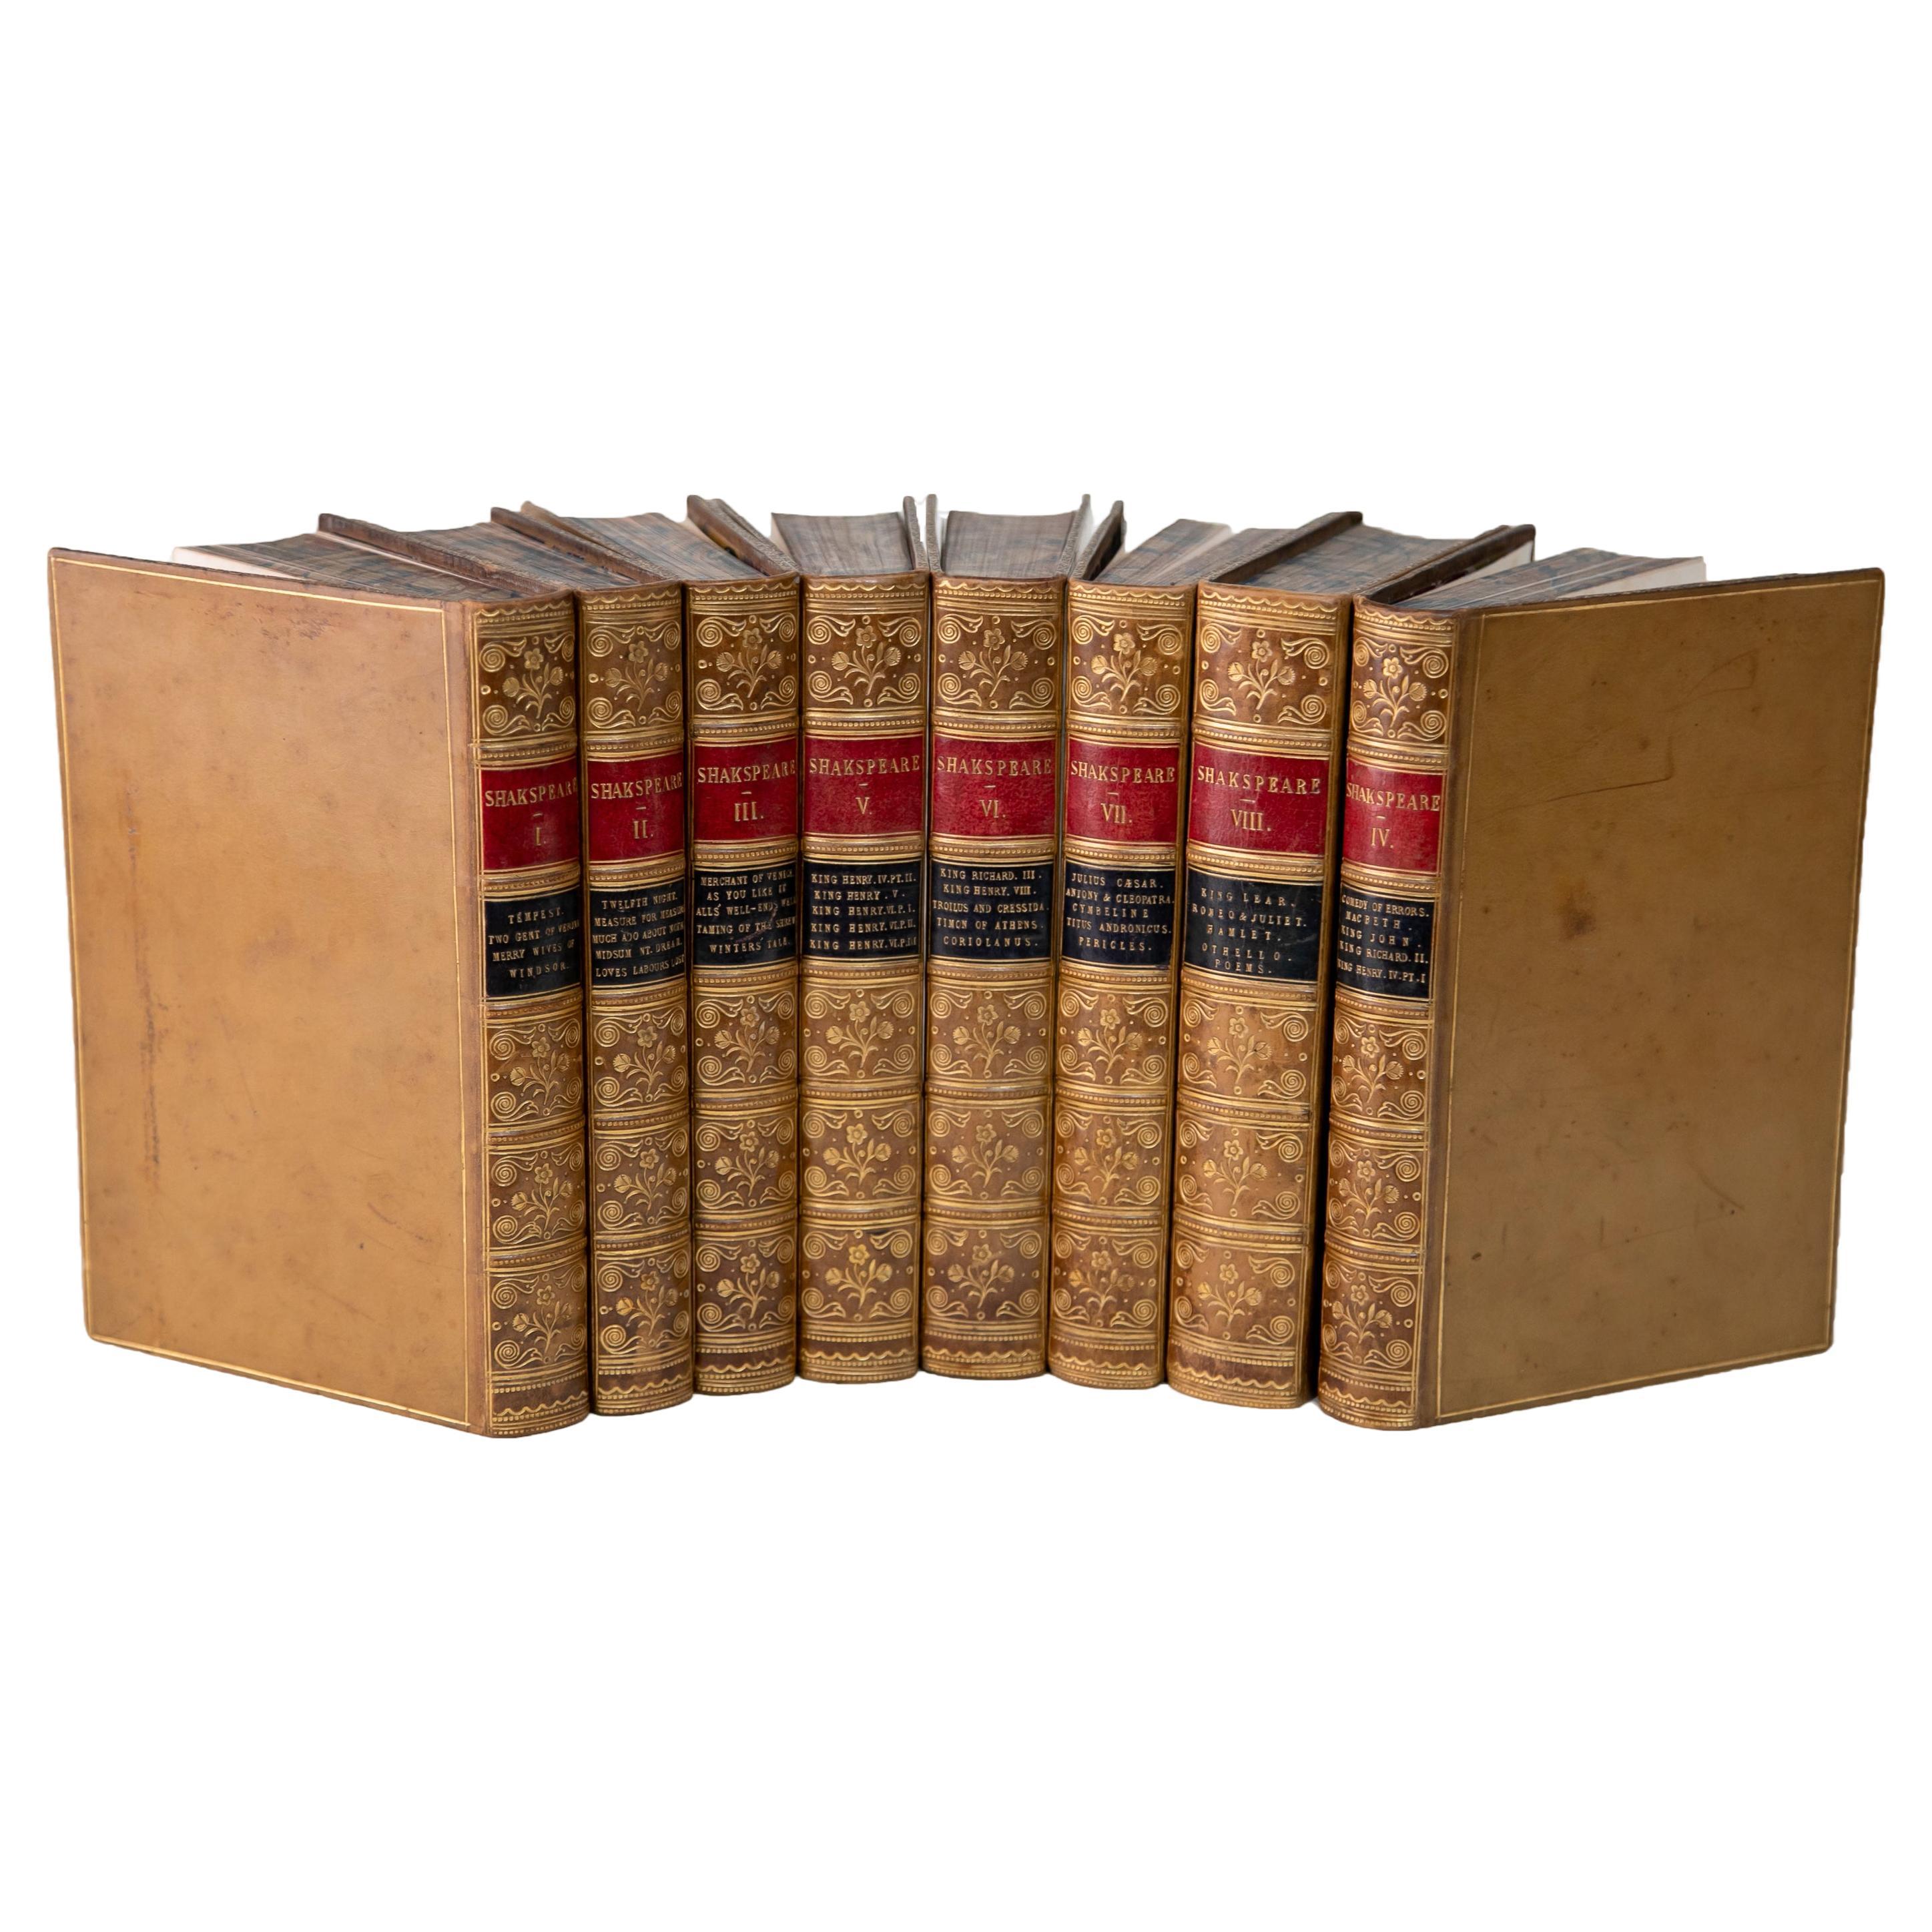 8 Volumes, William Shakespeare, the Dramatic Works